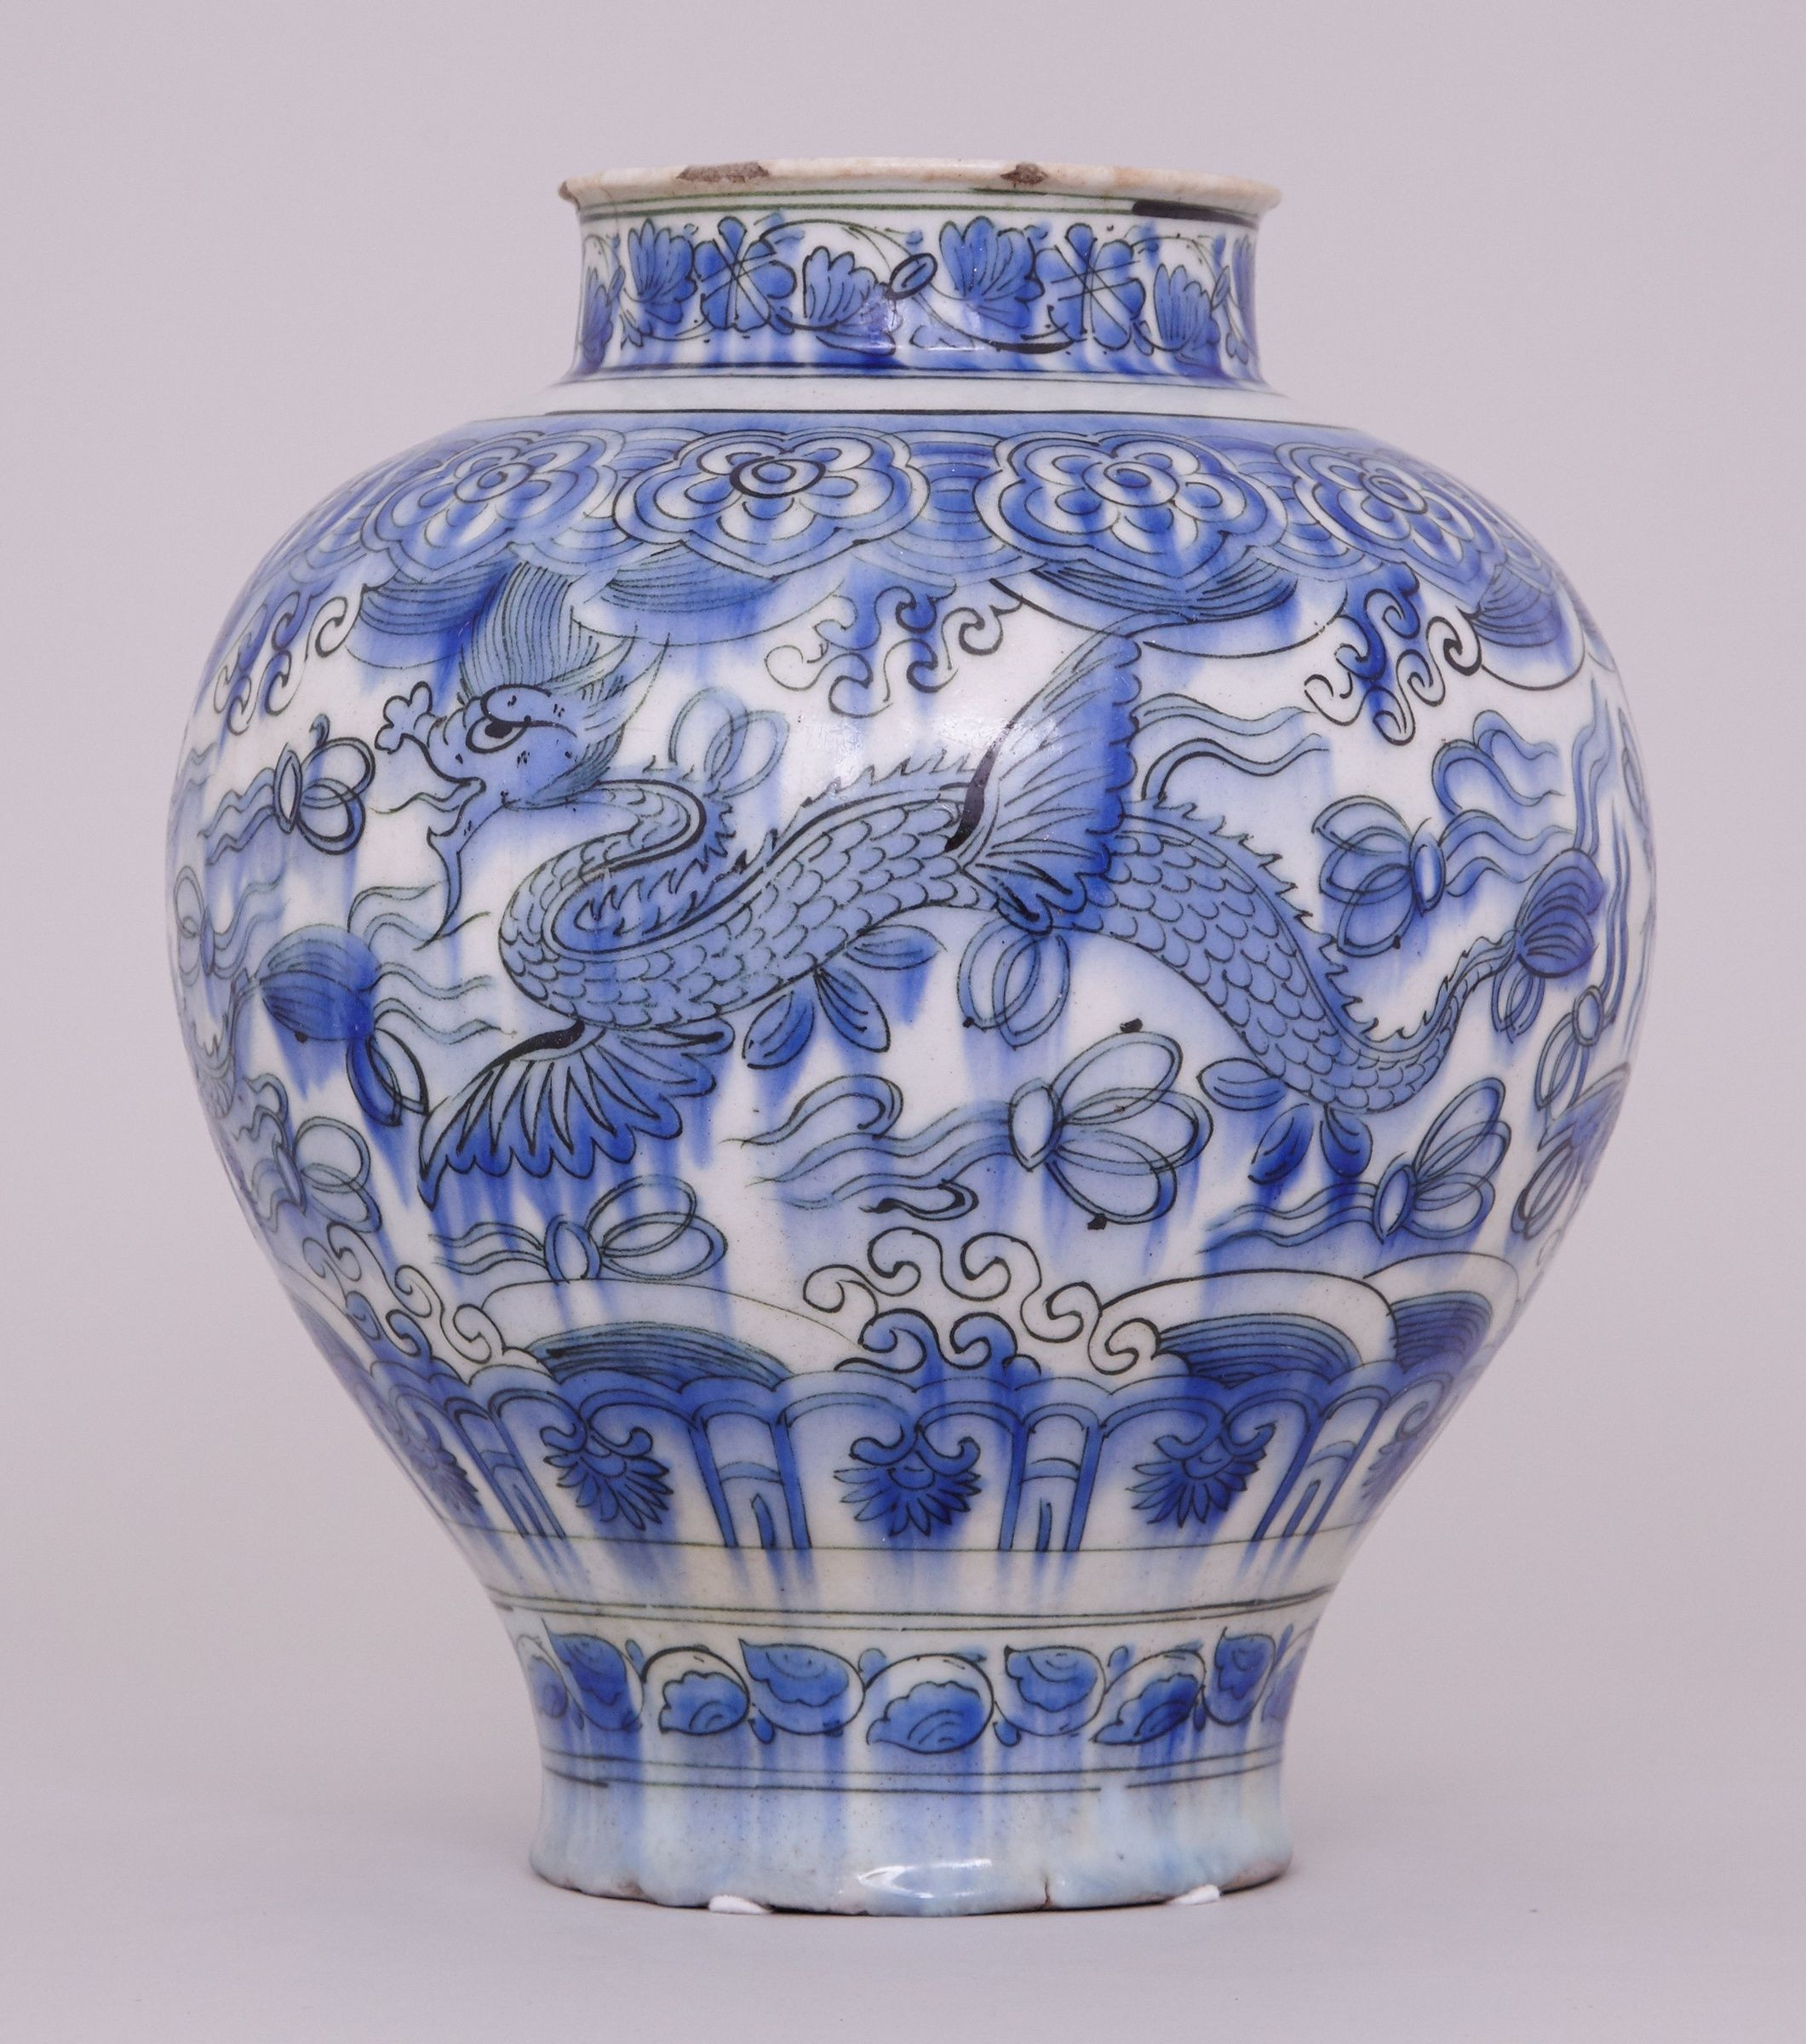 23 Fabulous Chinese Porcelain Vase 2023 free download chinese porcelain vase of white pottery vase elegant a blue and white persian safavid jar 17th regarding white pottery vase elegant a blue and white persian safavid jar 17th century